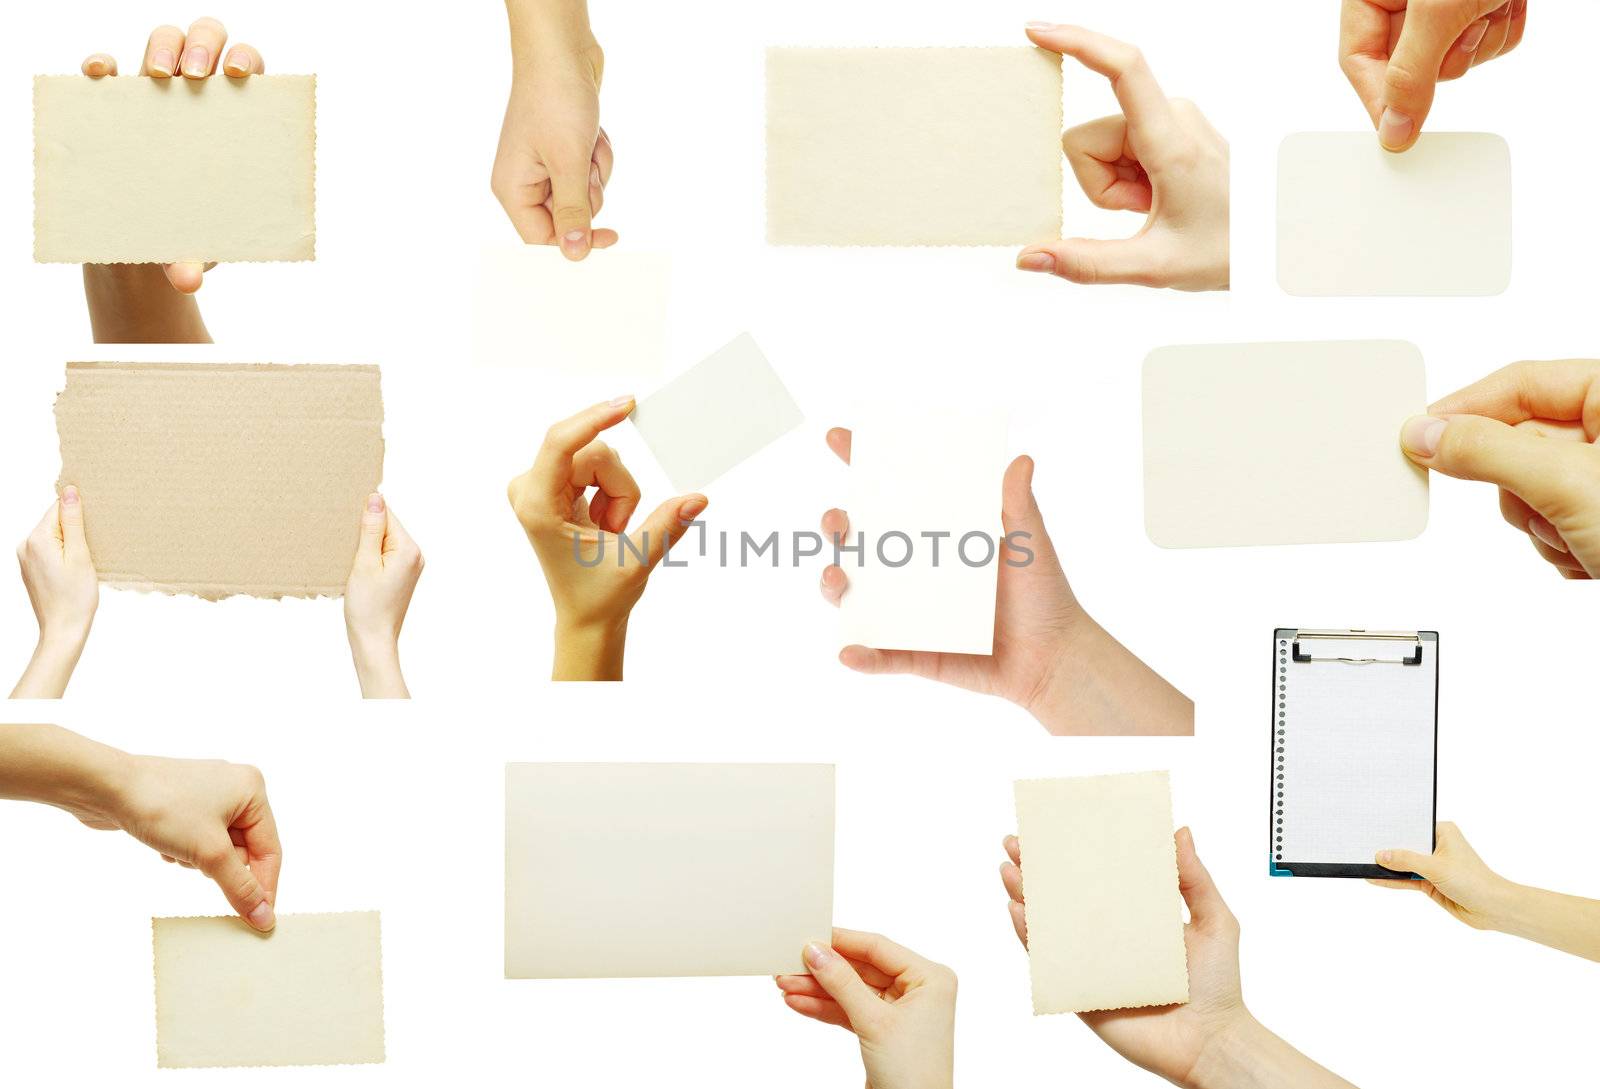 Man hand holding a blank business card